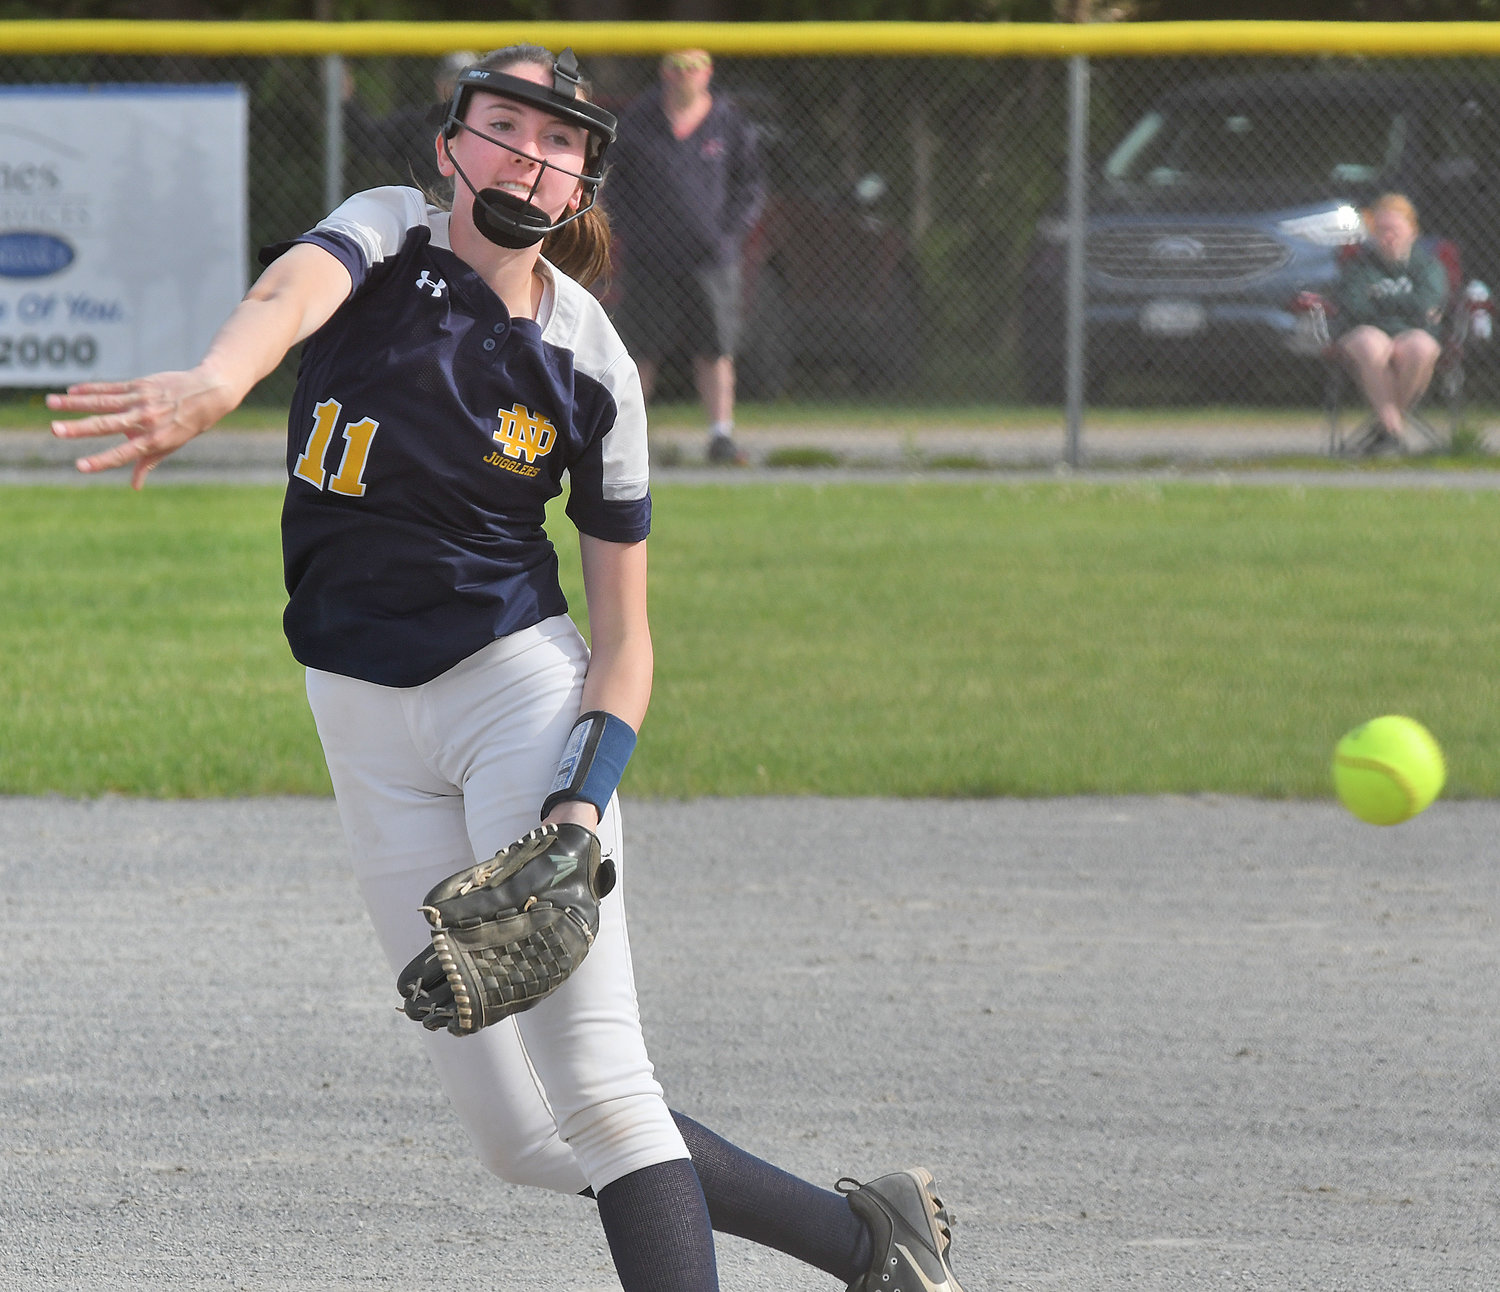 Utica Notre Dame pitcher Ella Trinkaus delivers a pitch against host Adirondack in the Section III Class C first round game Monday. The Wildcats, the 16 seed, lost 5-1 to the 17-seeded Jugglers. Notre Dame will take on the top seed Port Byron Tuesday.